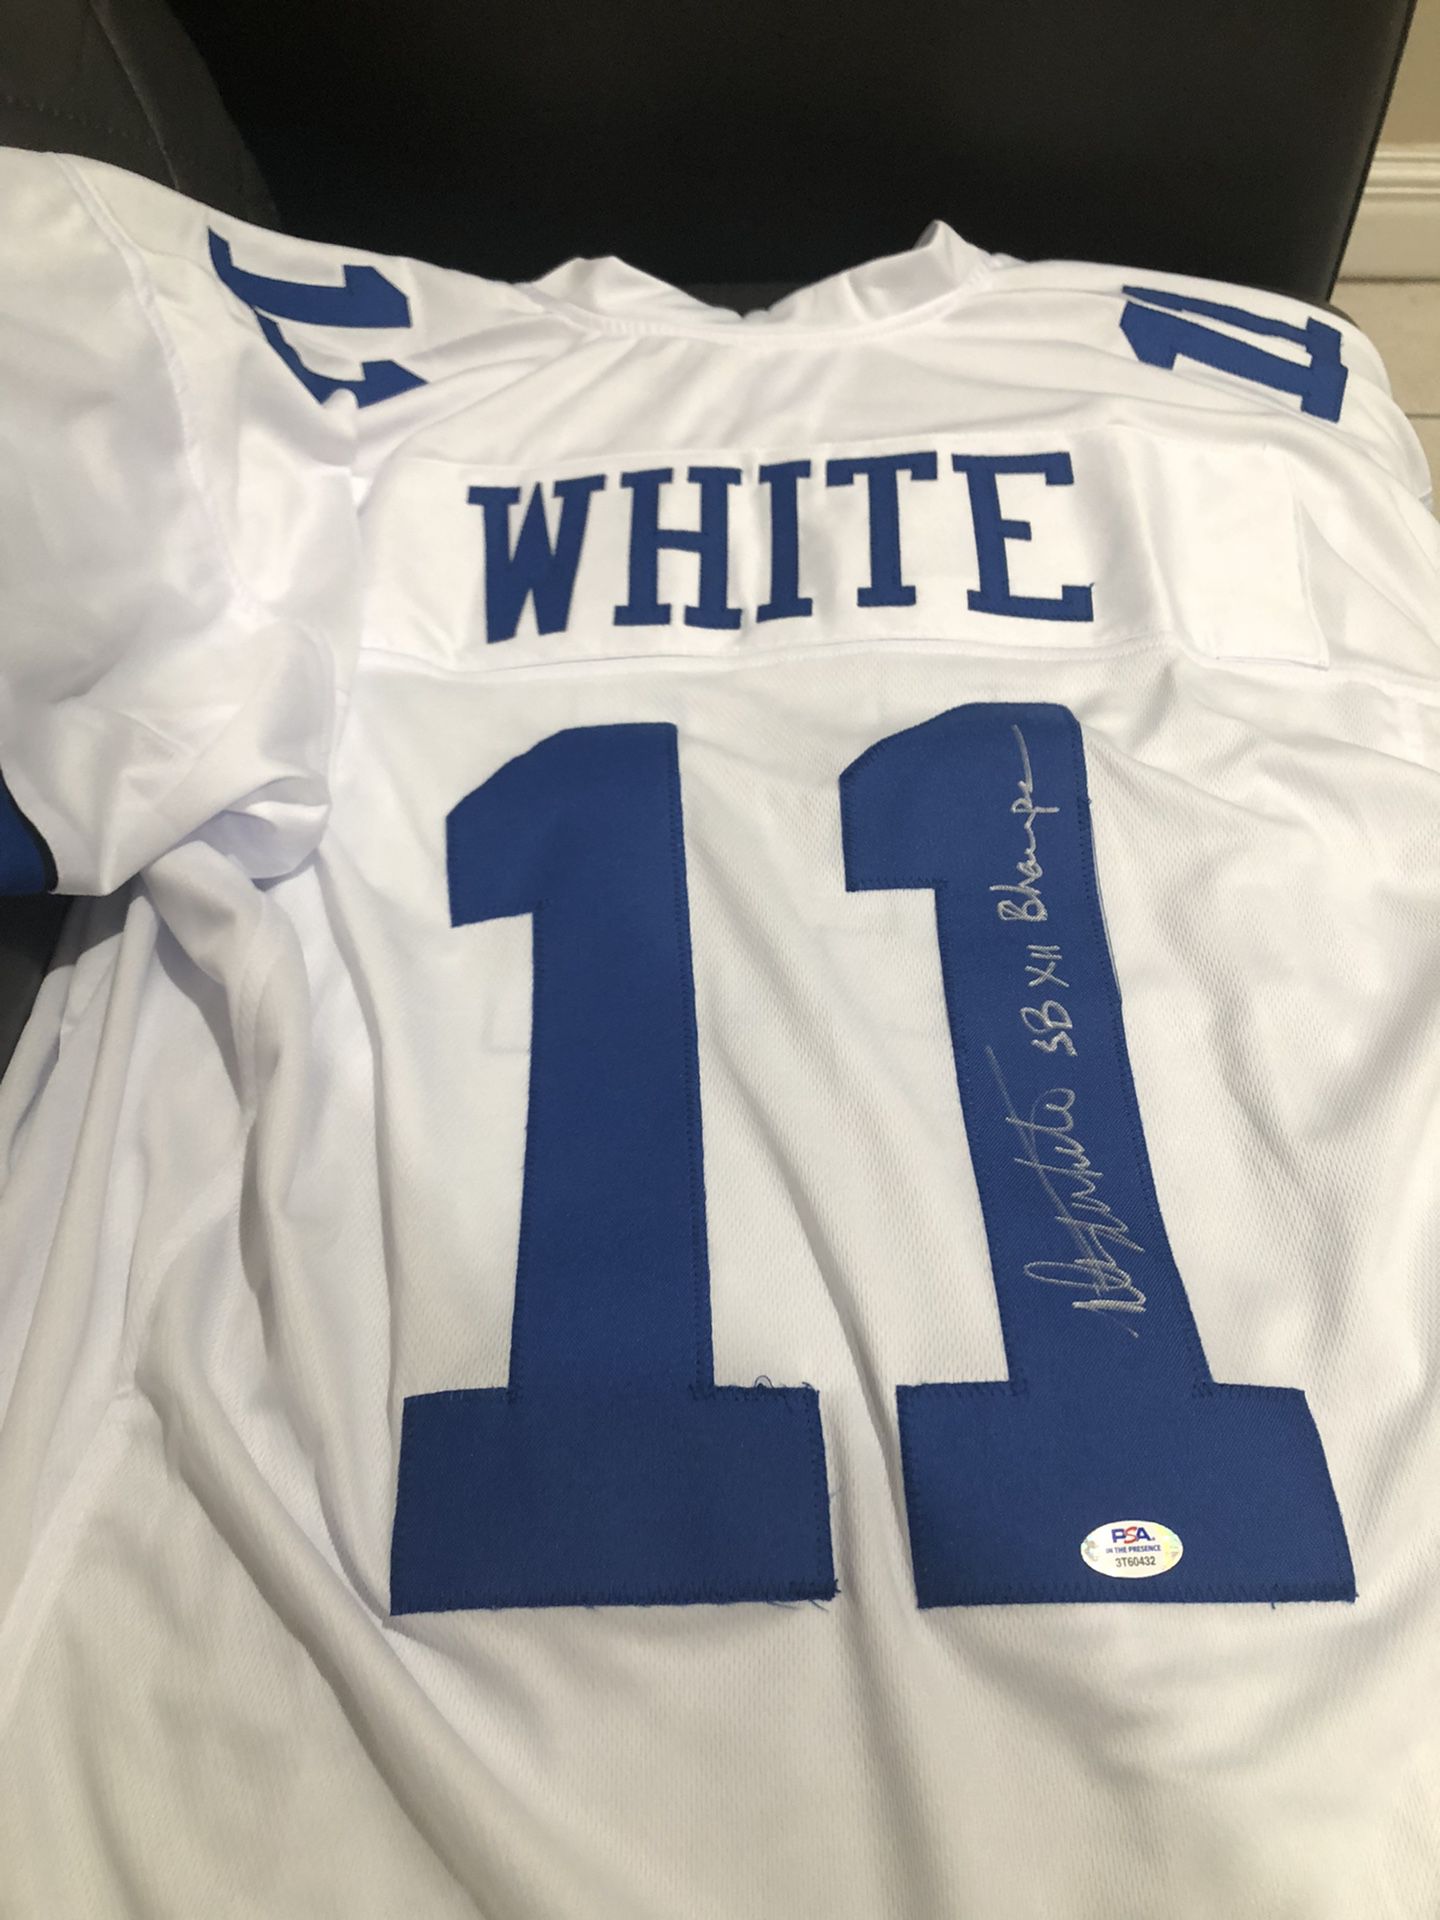 Danny White Signed Jersey Inscribed "SB XII Champs" (PSA)